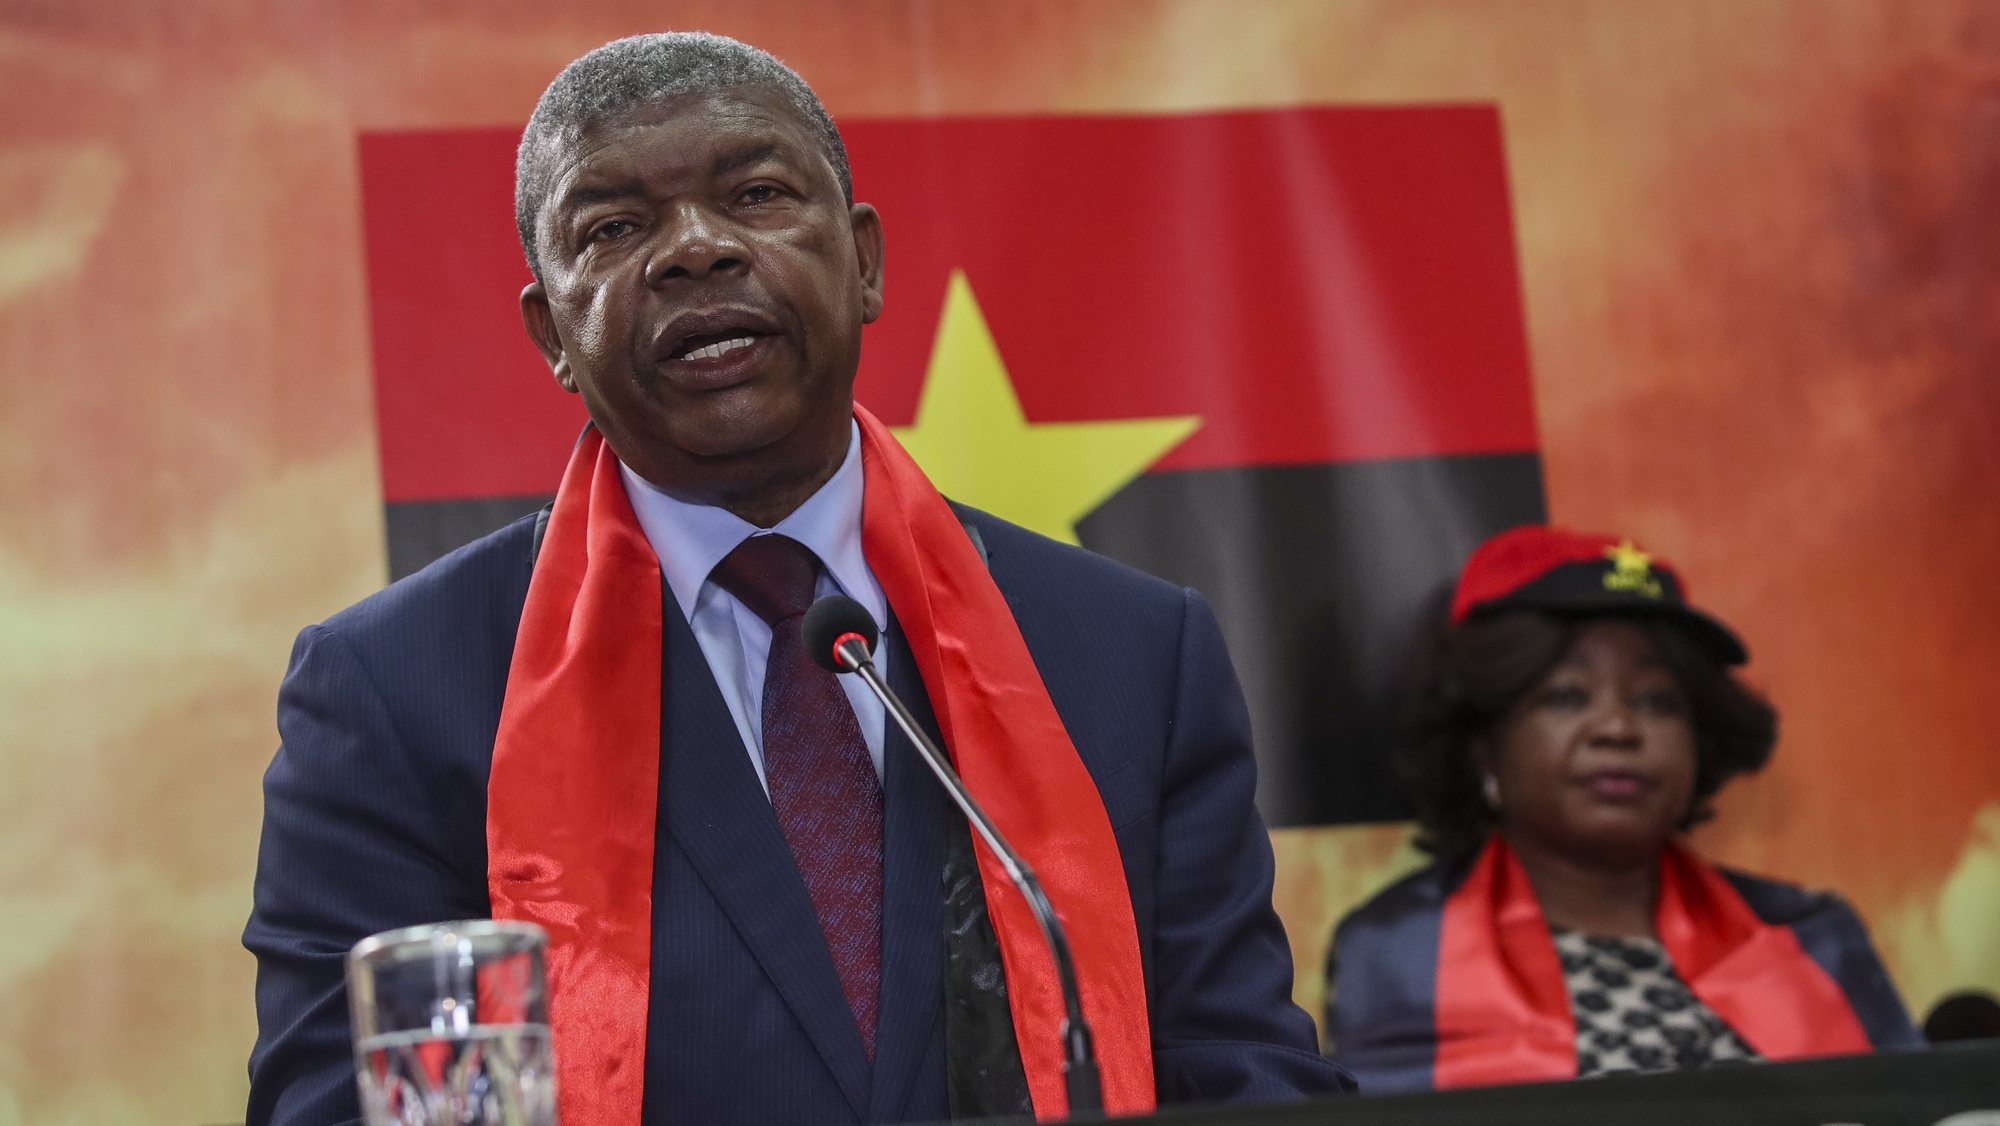 epa10145739 Incumbent President and Presidential candidate for the People&#039;s Movement for the Liberation of Angola (MPLA) Joao Lourenco attends a press conference after the National Electoral Commission (CNE) certified his party&#039;s victory in the 24 August general elections, at the MPLA headquarters in Luanda, Angola, 29 August 2022. The CNE published results 29 August that the MPLA won just more than 51 percent of the vote, guaranteeing a second term for Lourenco.  EPA/PAULO NOVAIS